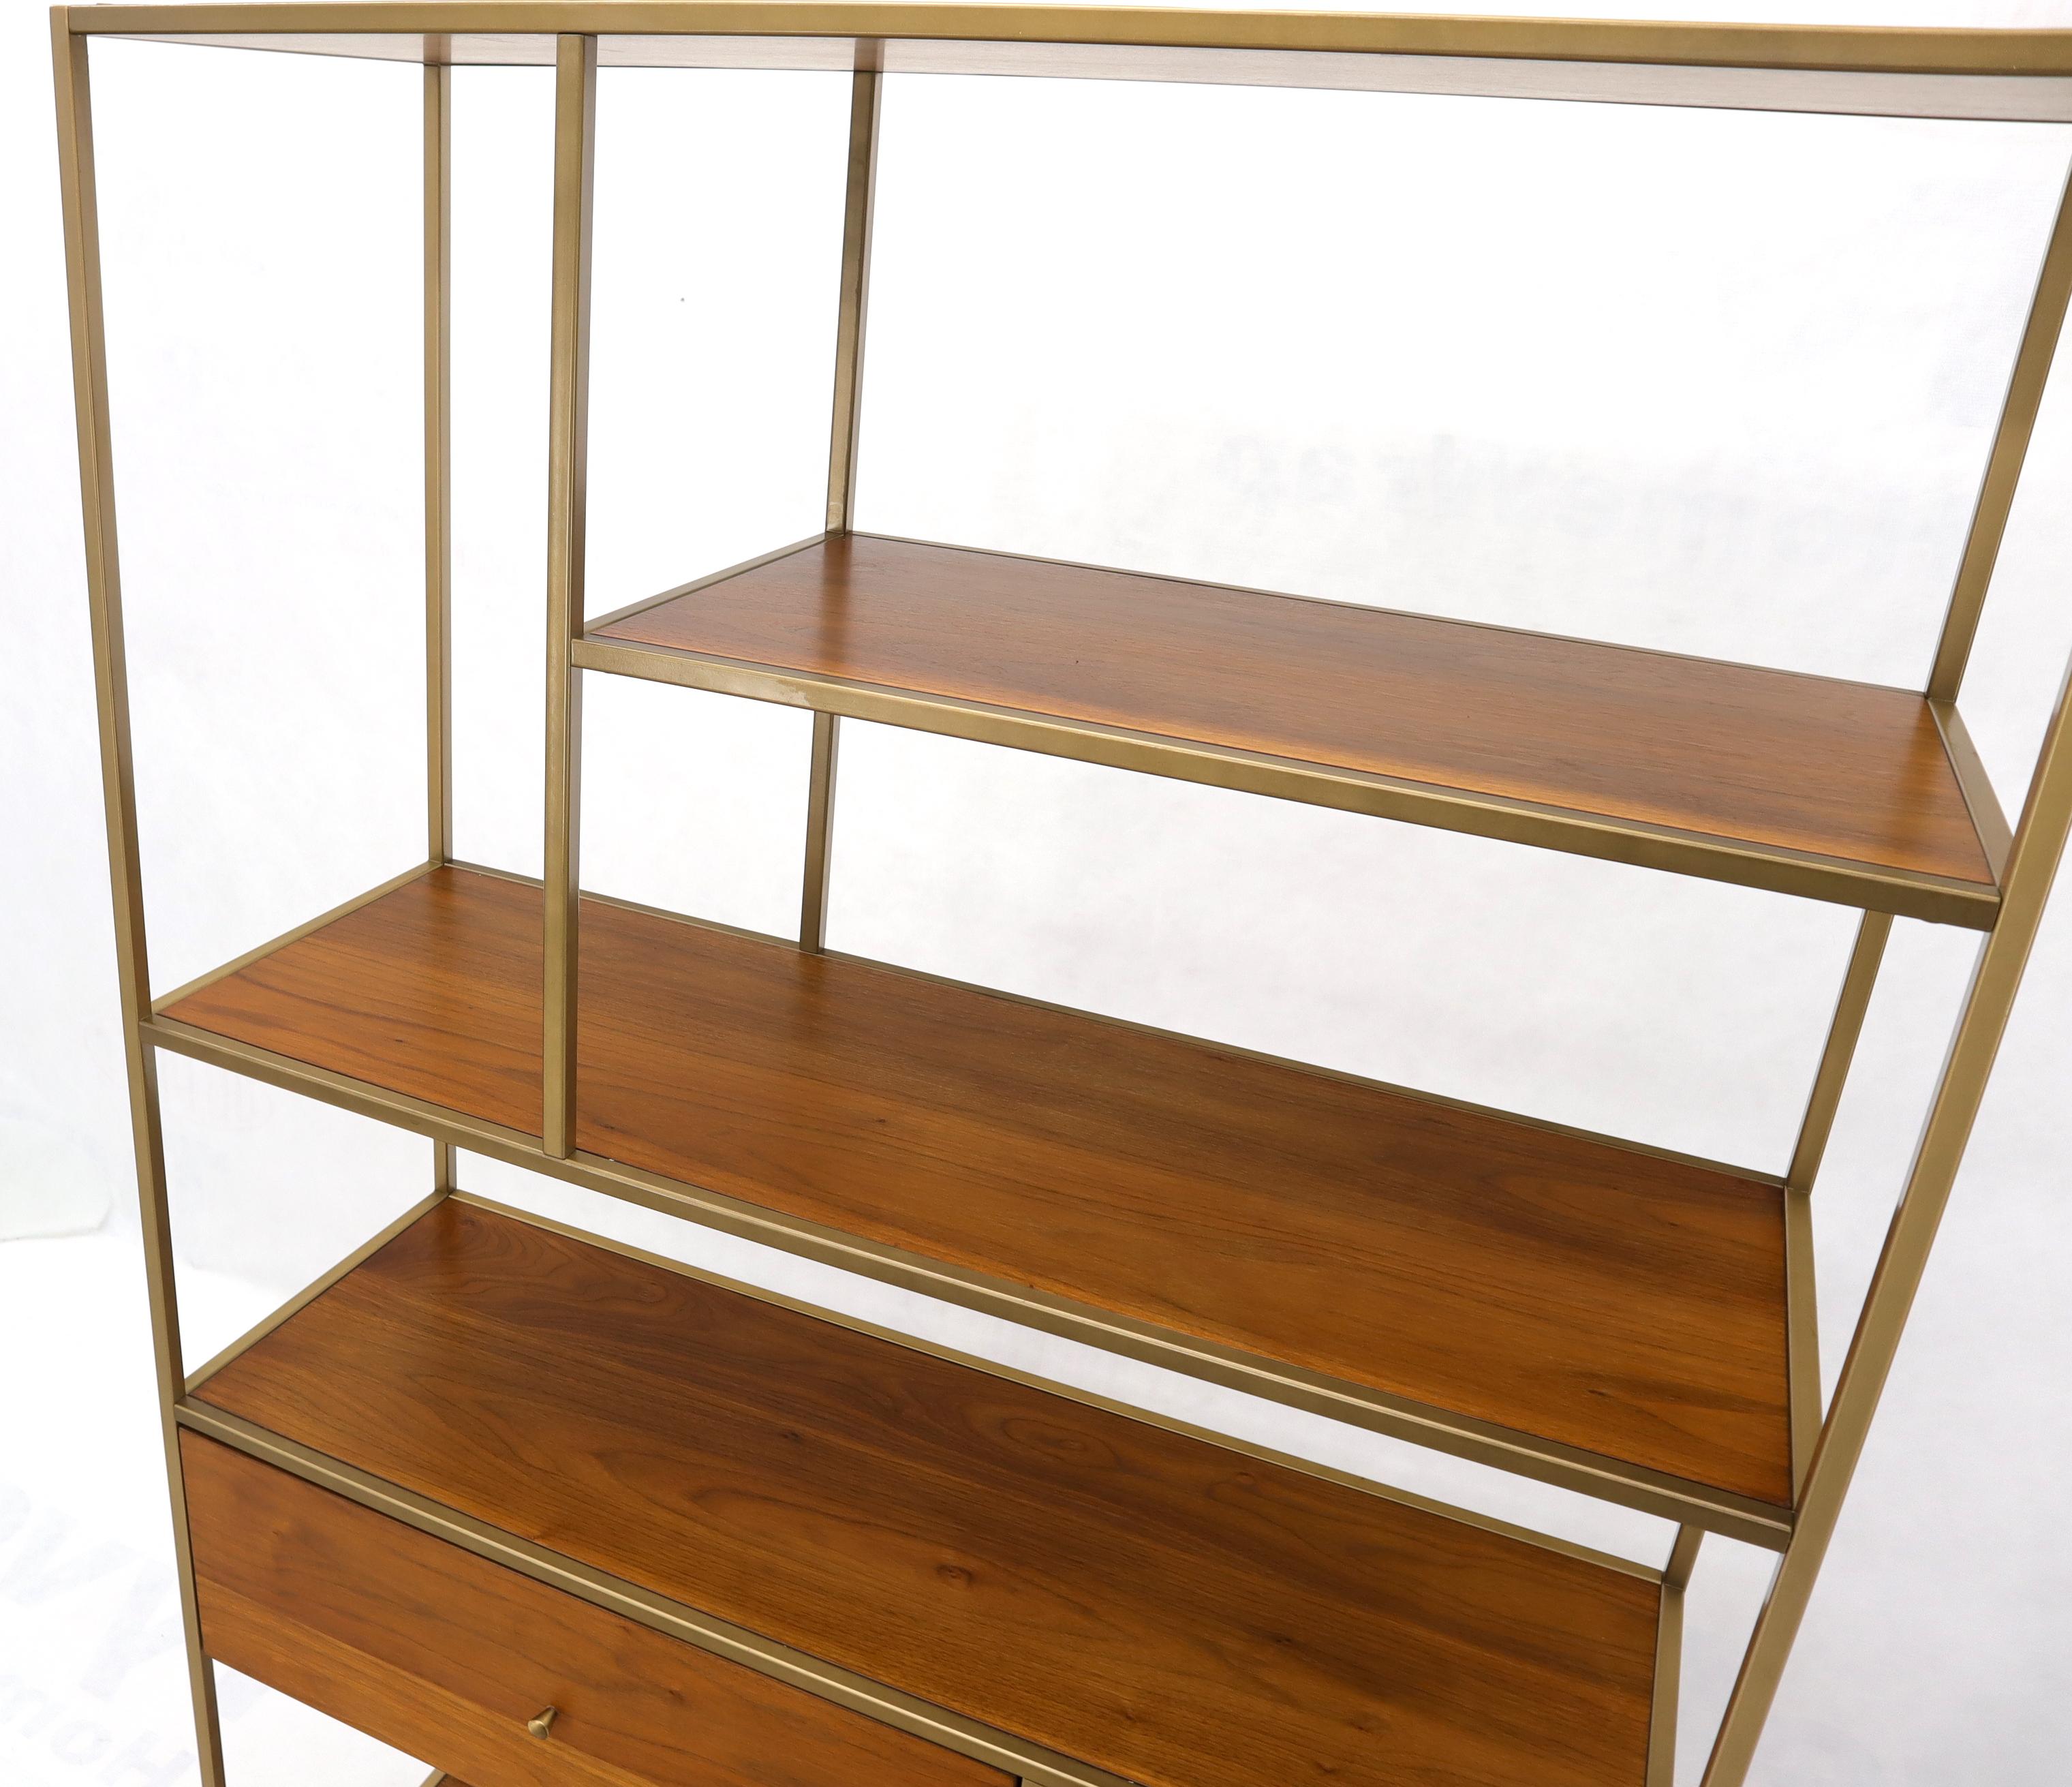 Lacquered Walnut and Brass Etagere Bookcase Shelving Wall Unit McCobb Style